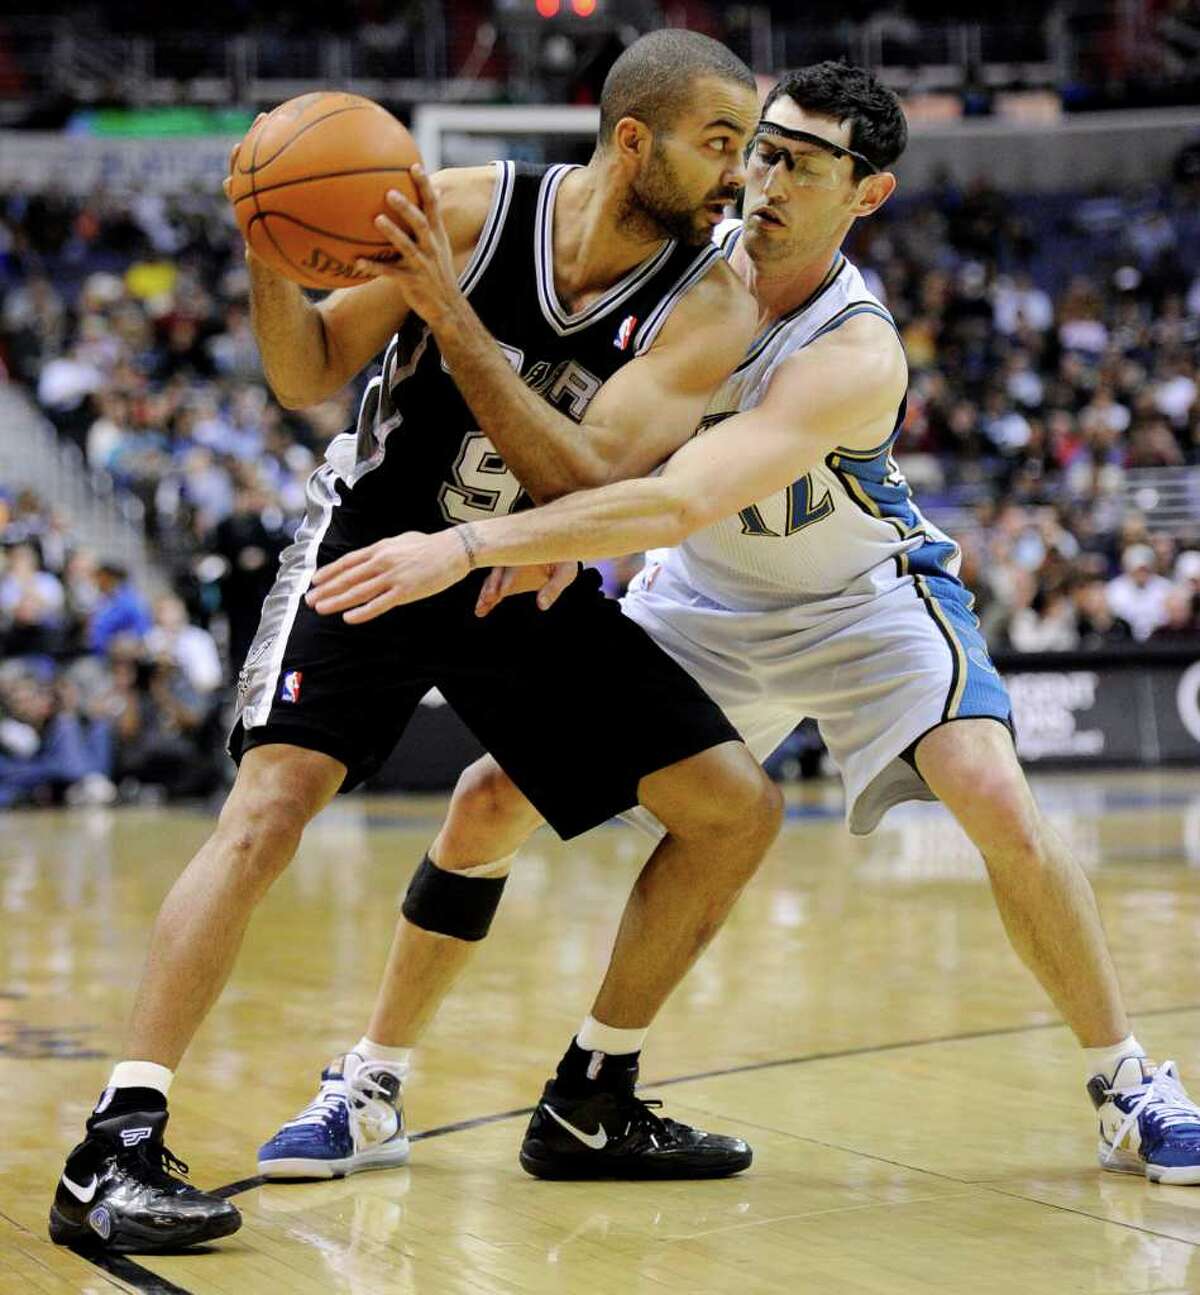 Spurs guard Tony Parker (left), shown under pressure from Washington Wizards guard Kirk Hinrich, has been in All-Star form since basketball became his “escape” from personal drama.